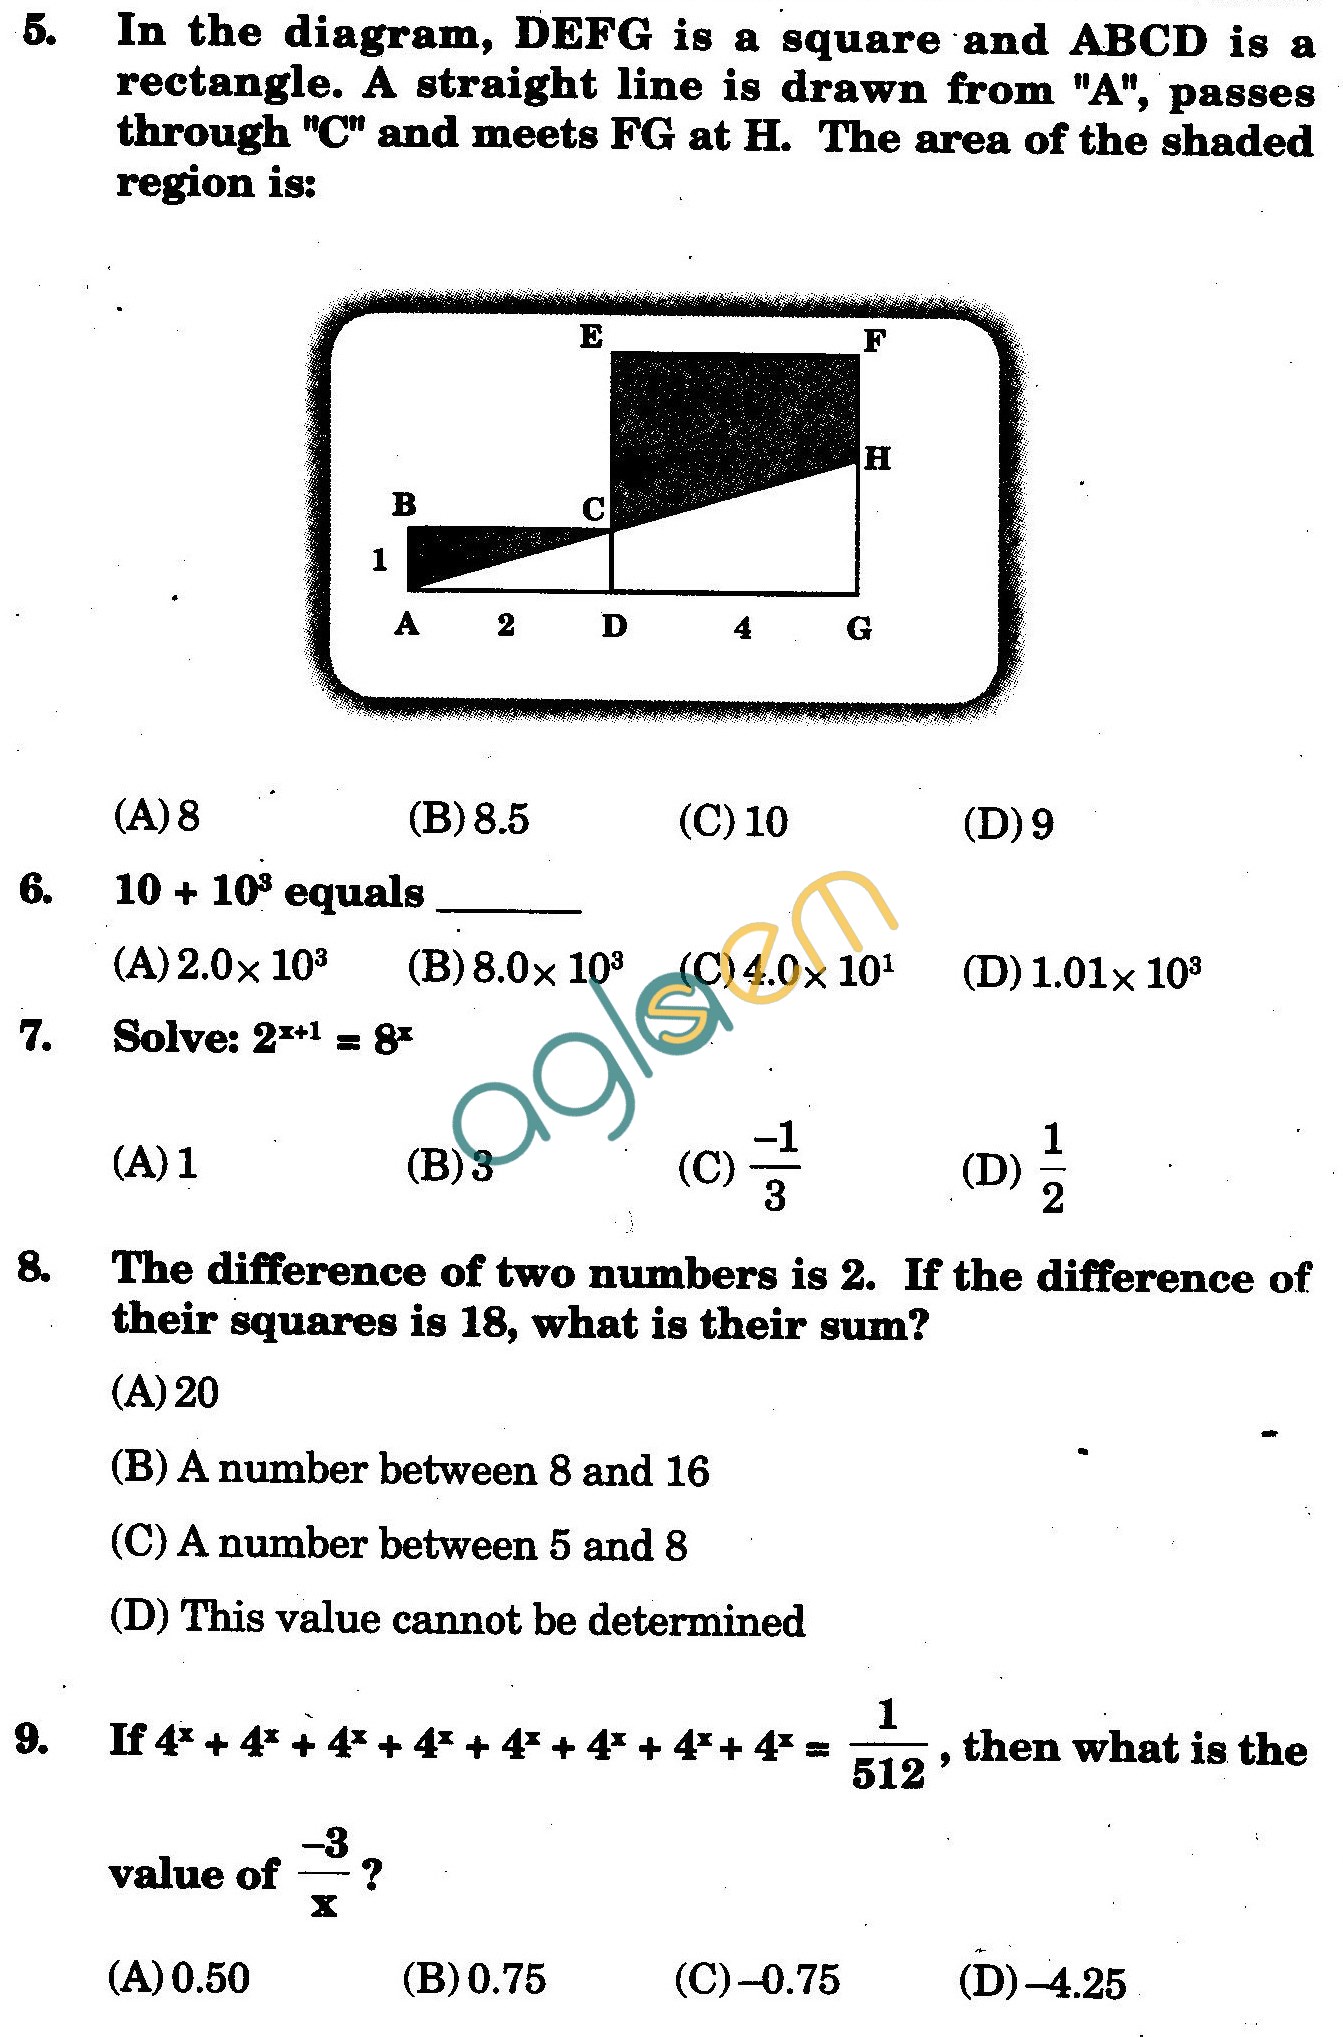 NSTSE 2009 Class VIII Question Paper with Answers - Mathematics